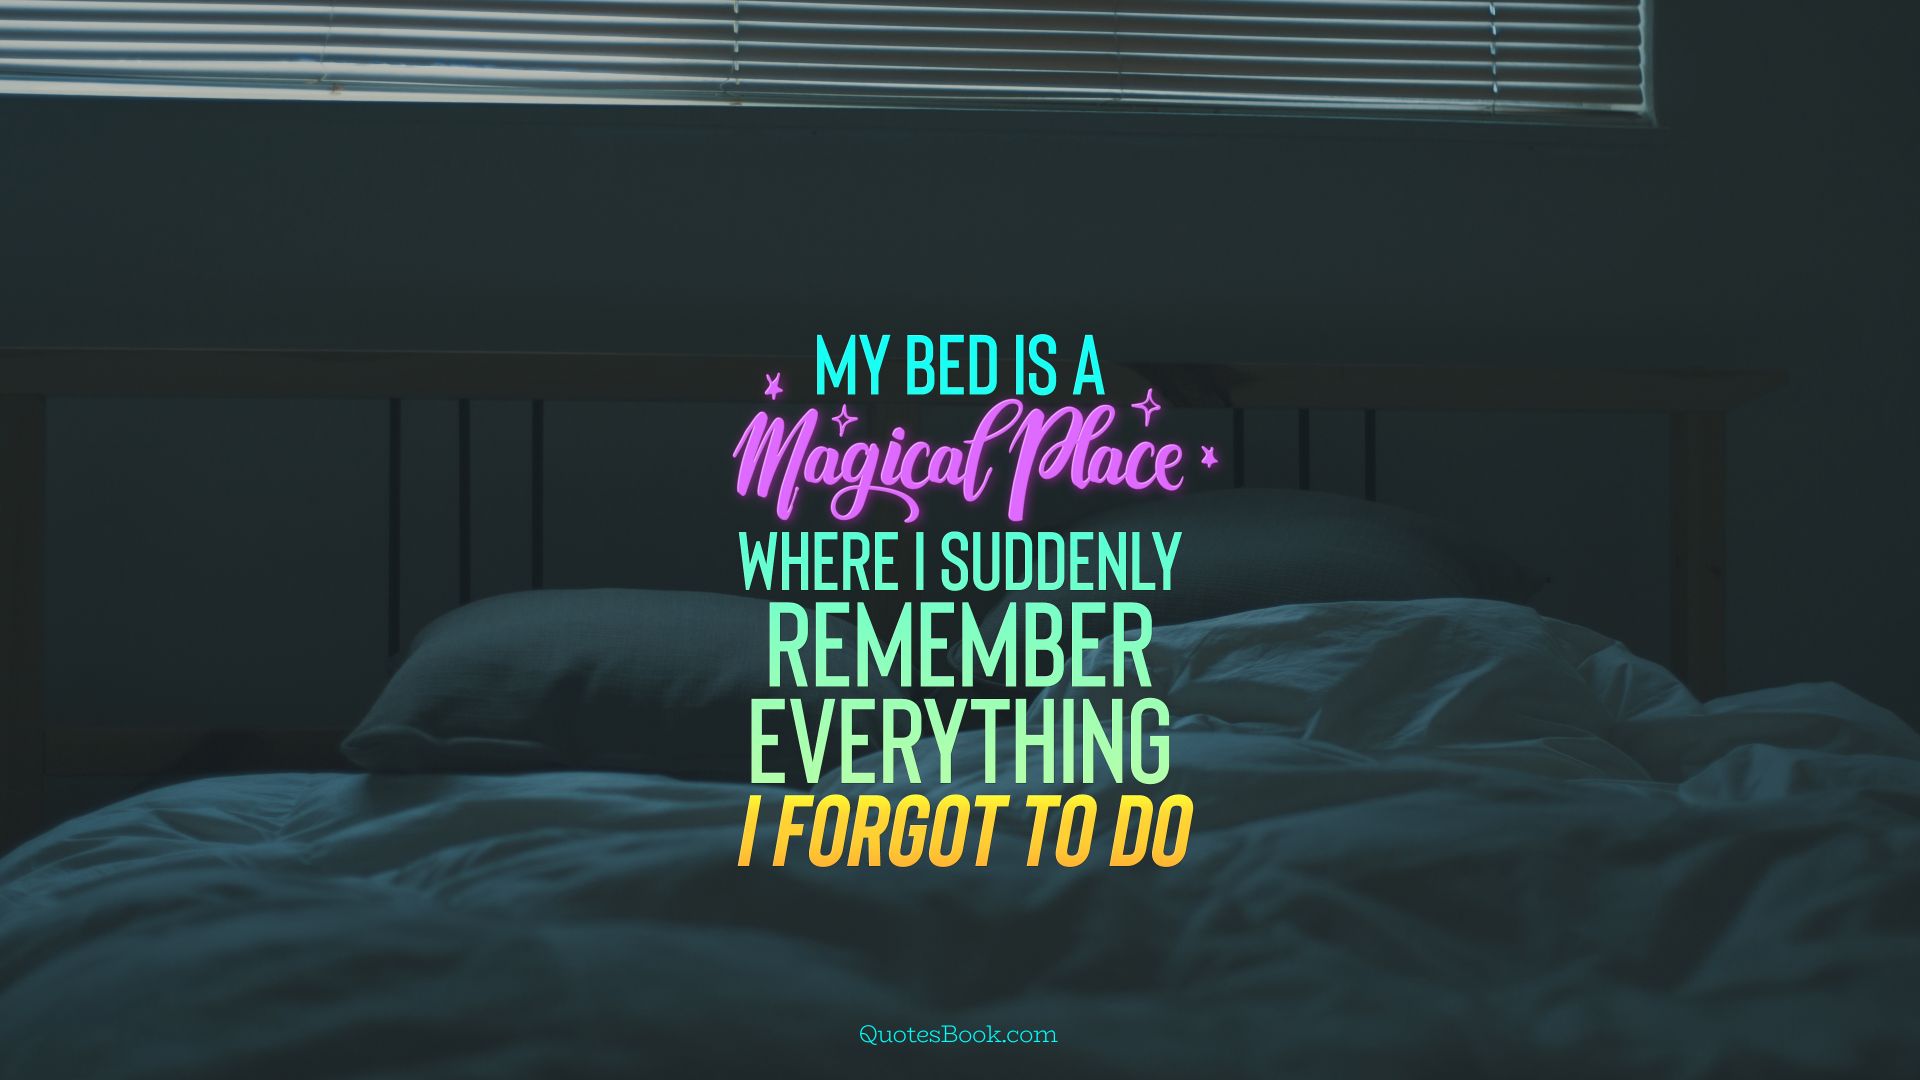 My bed is a magical place where I suddenly remember everything I forgot to do